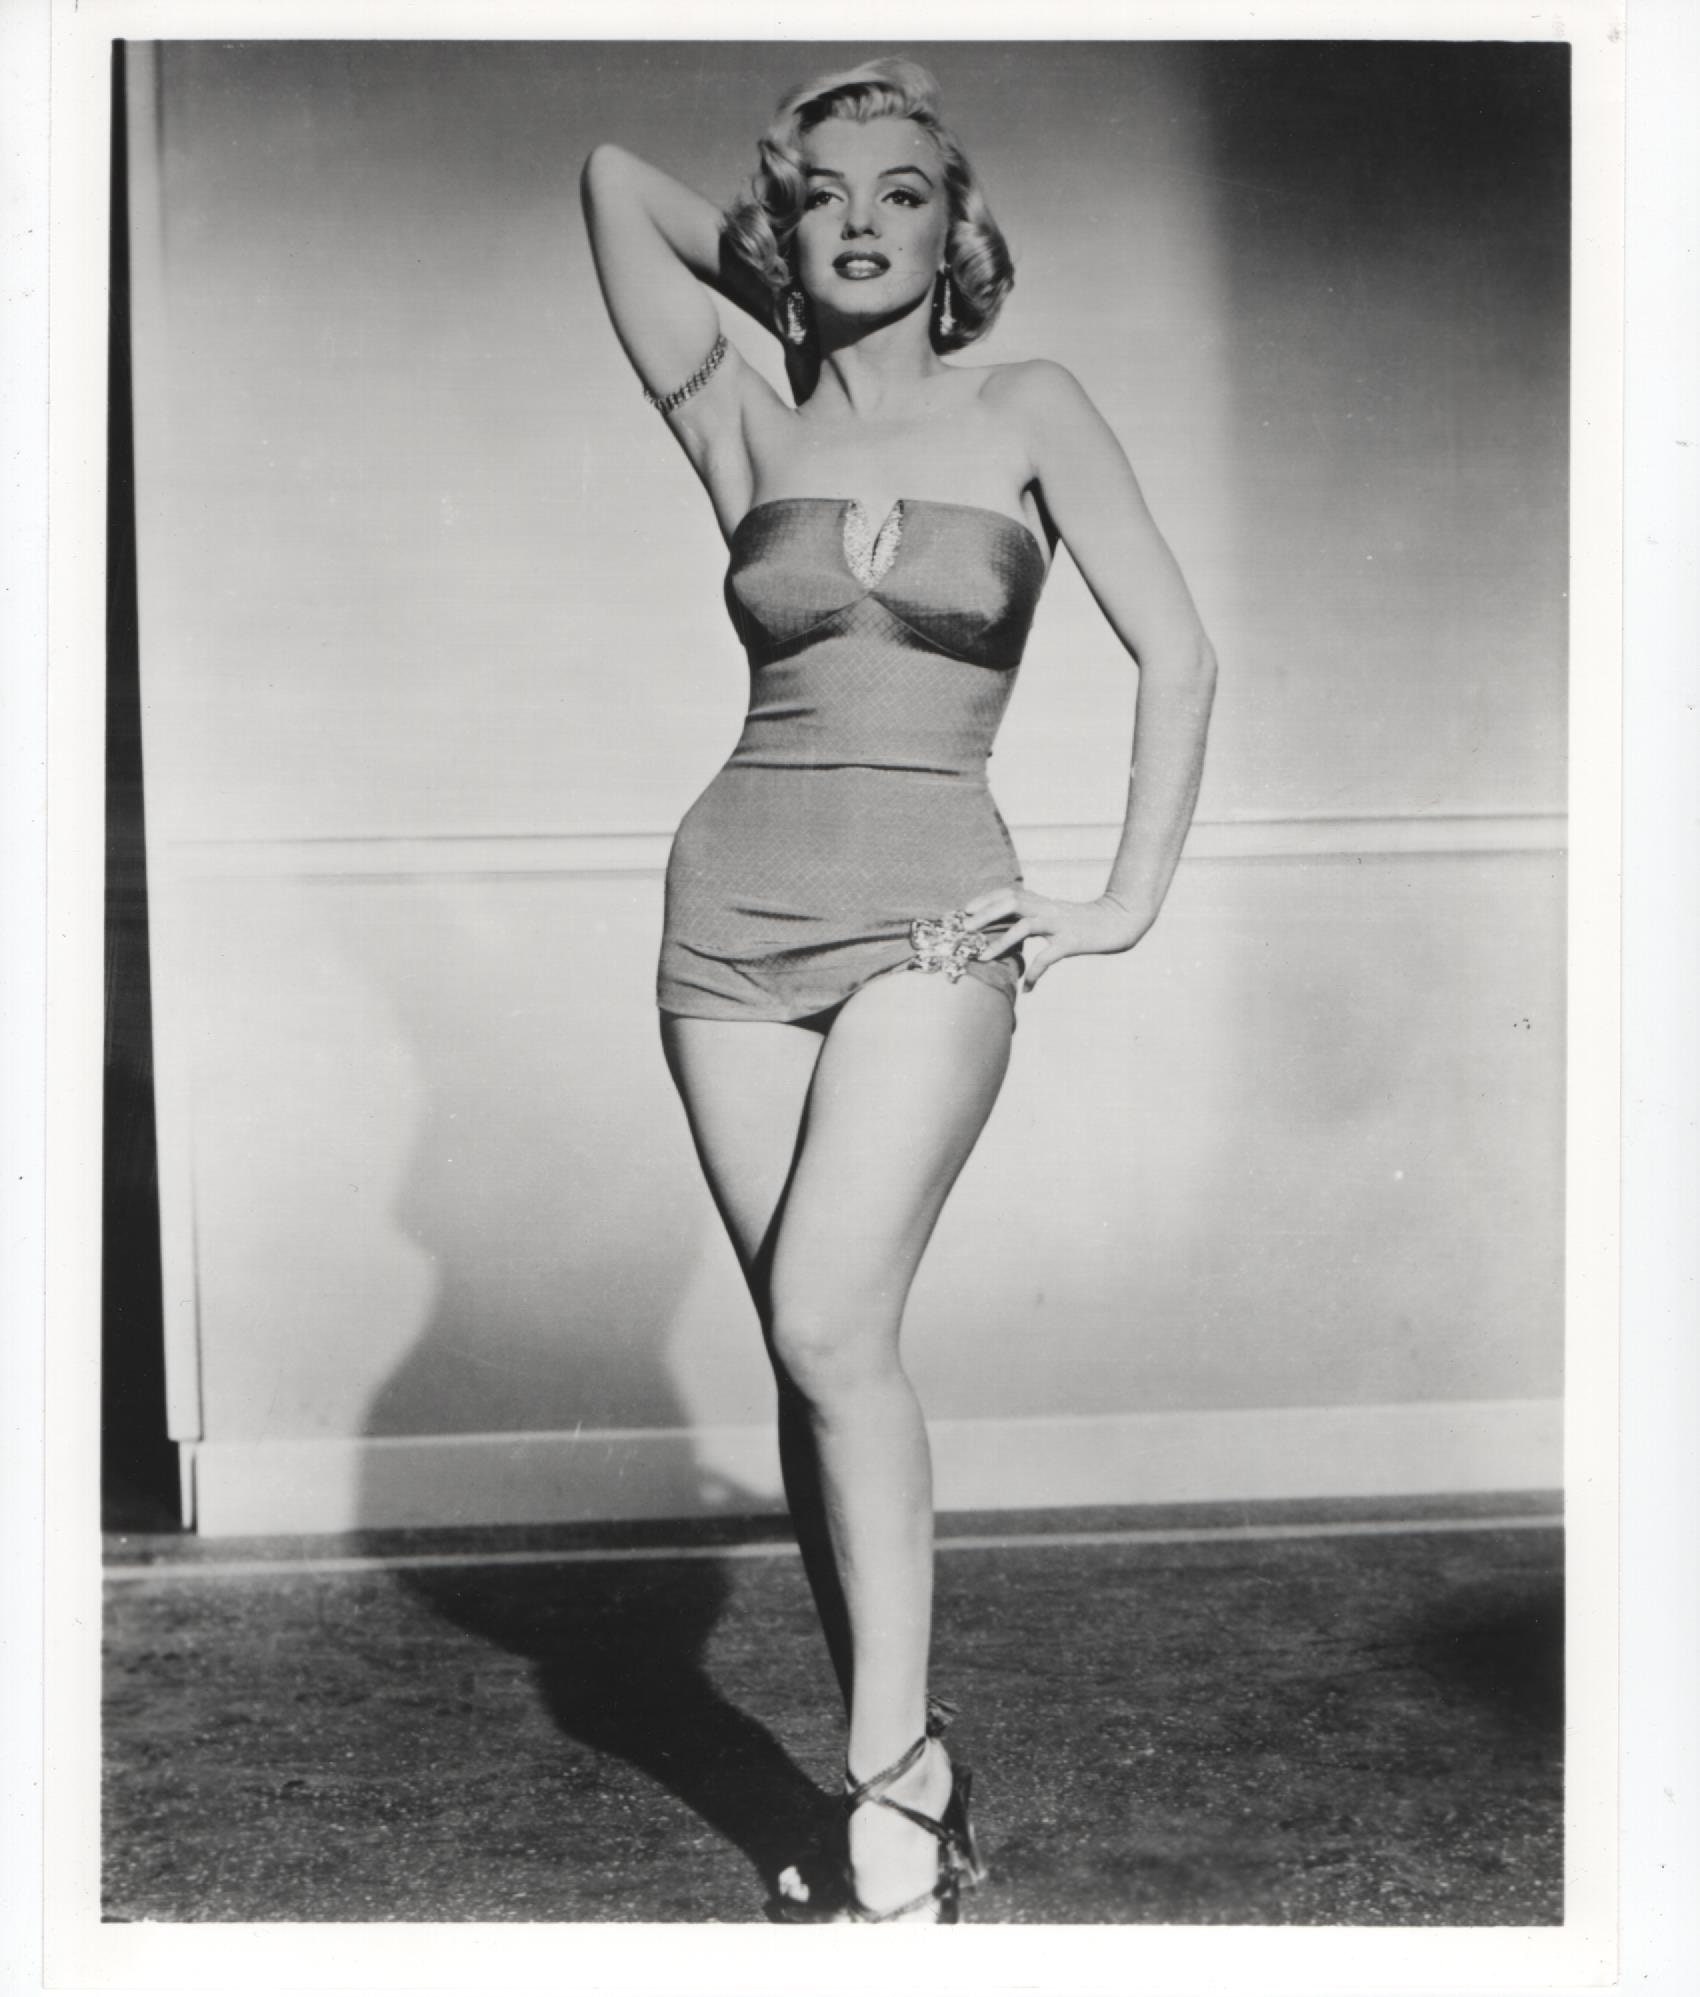 GLOSSY PHOTO PICTURE 8x10 Marilyn Monroe Bathing Suit 